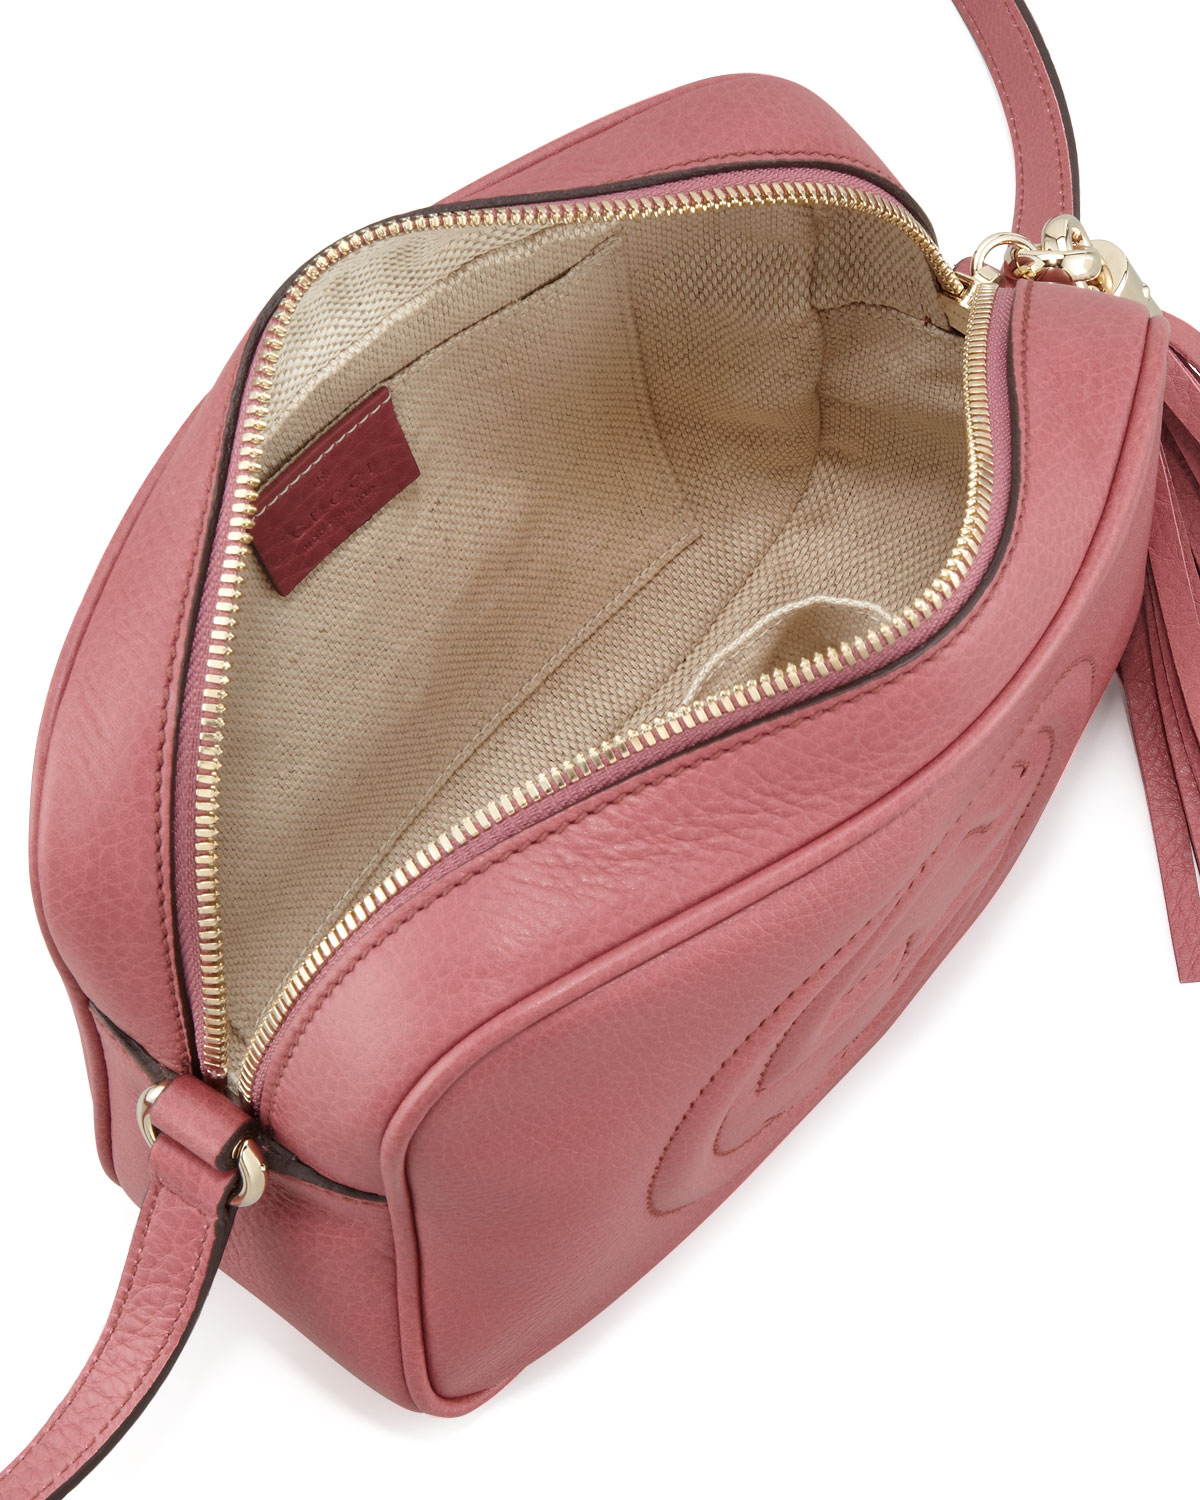 Gucci Soho Leather Disco Bag in Rose (Pink) - Lyst